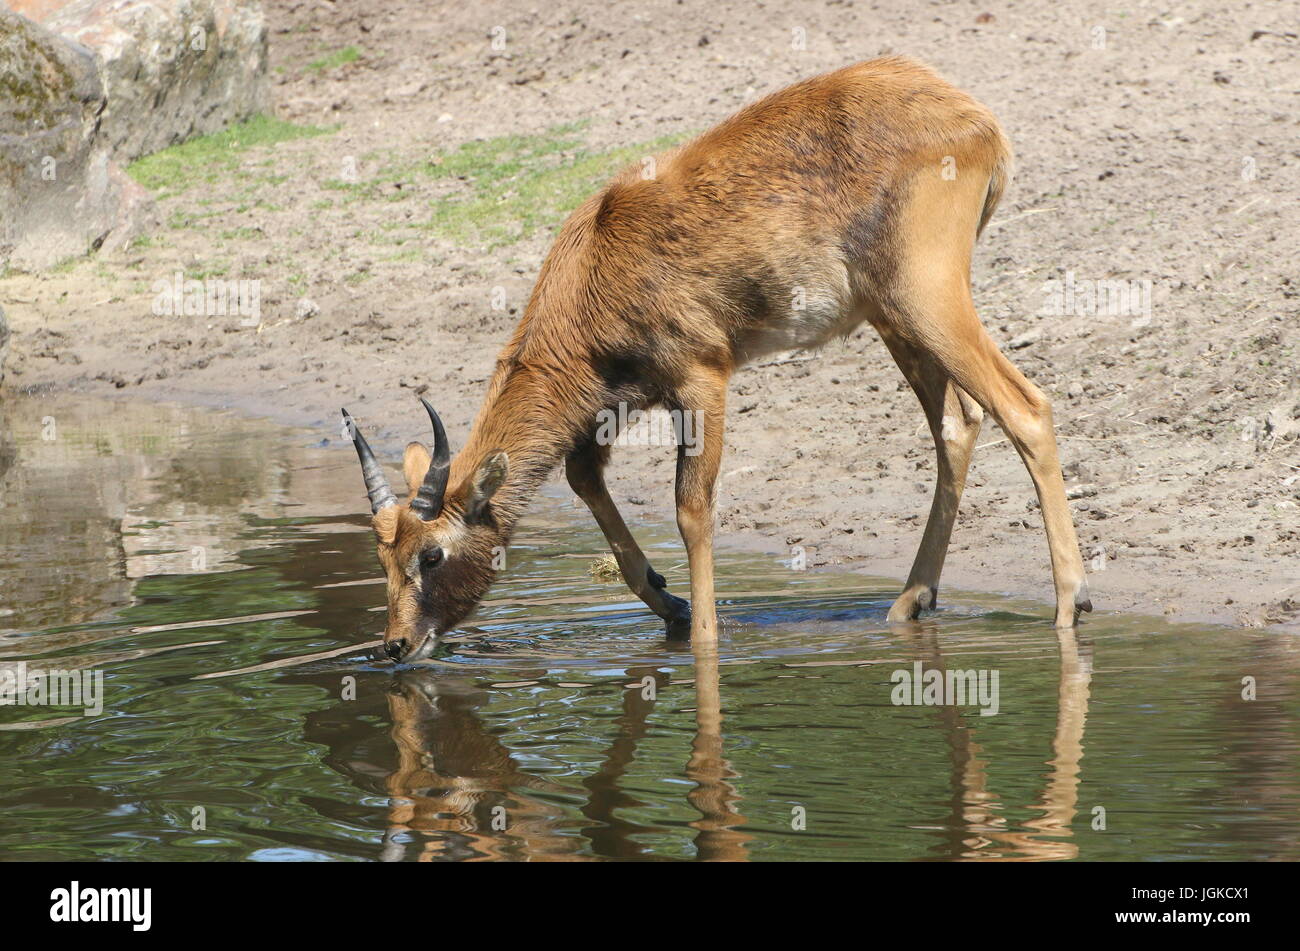 Young male Nile Lechwe or Mrs Gray's lechwe antelope (Kobus megaceros) at a watering hole. Endangered species found in South Sudan and Ethiopia. Stock Photo